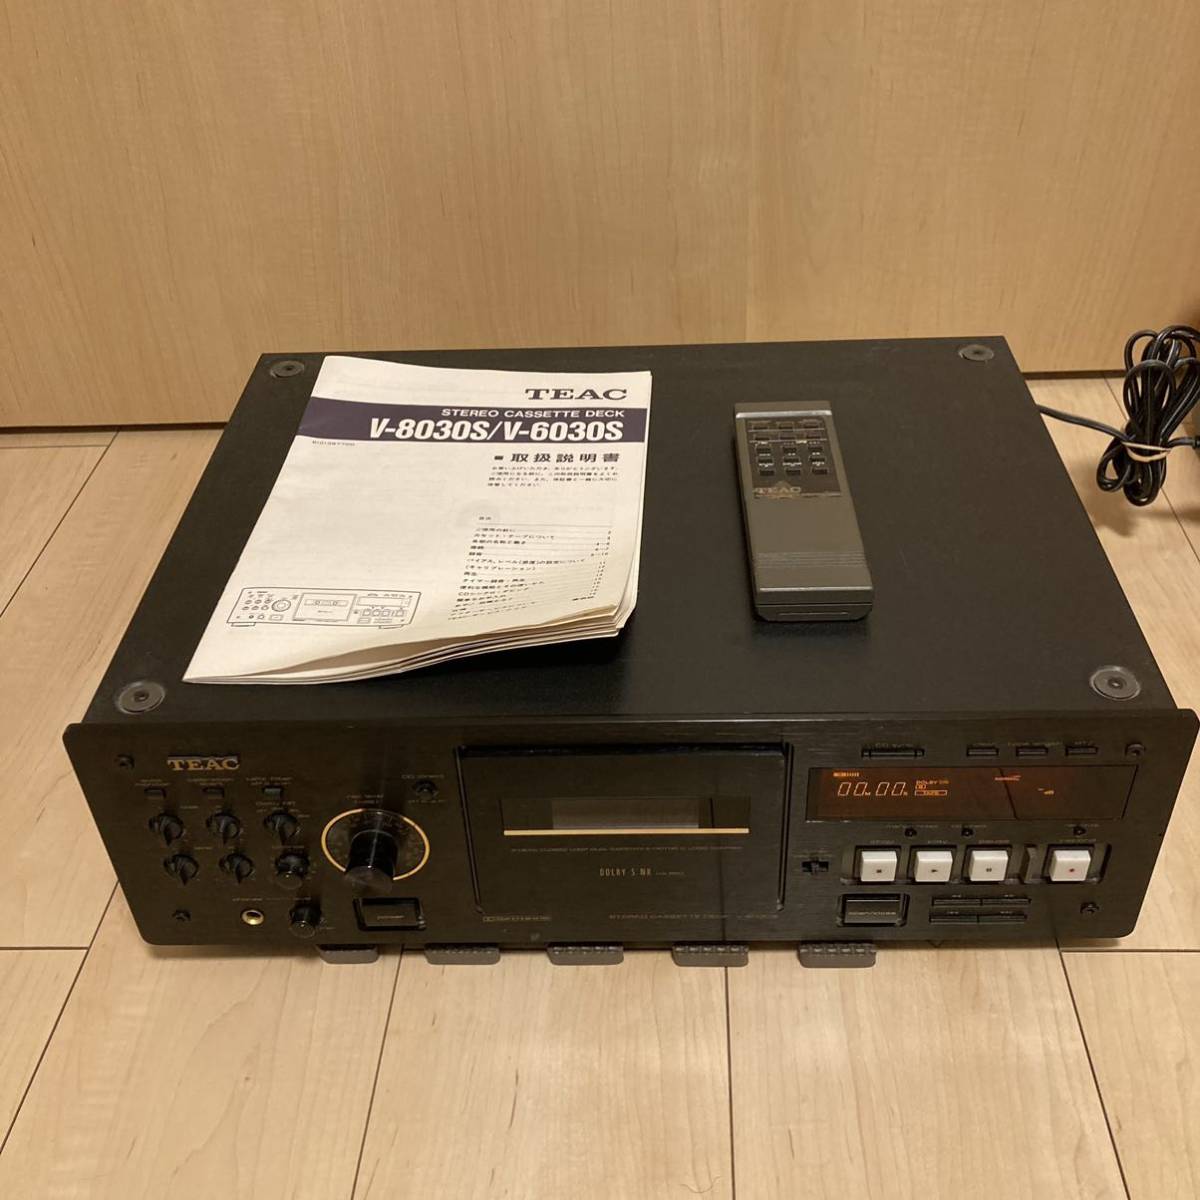 TEAC V-6030S ティアック カセットデッキ リモコン付属 ジャンク